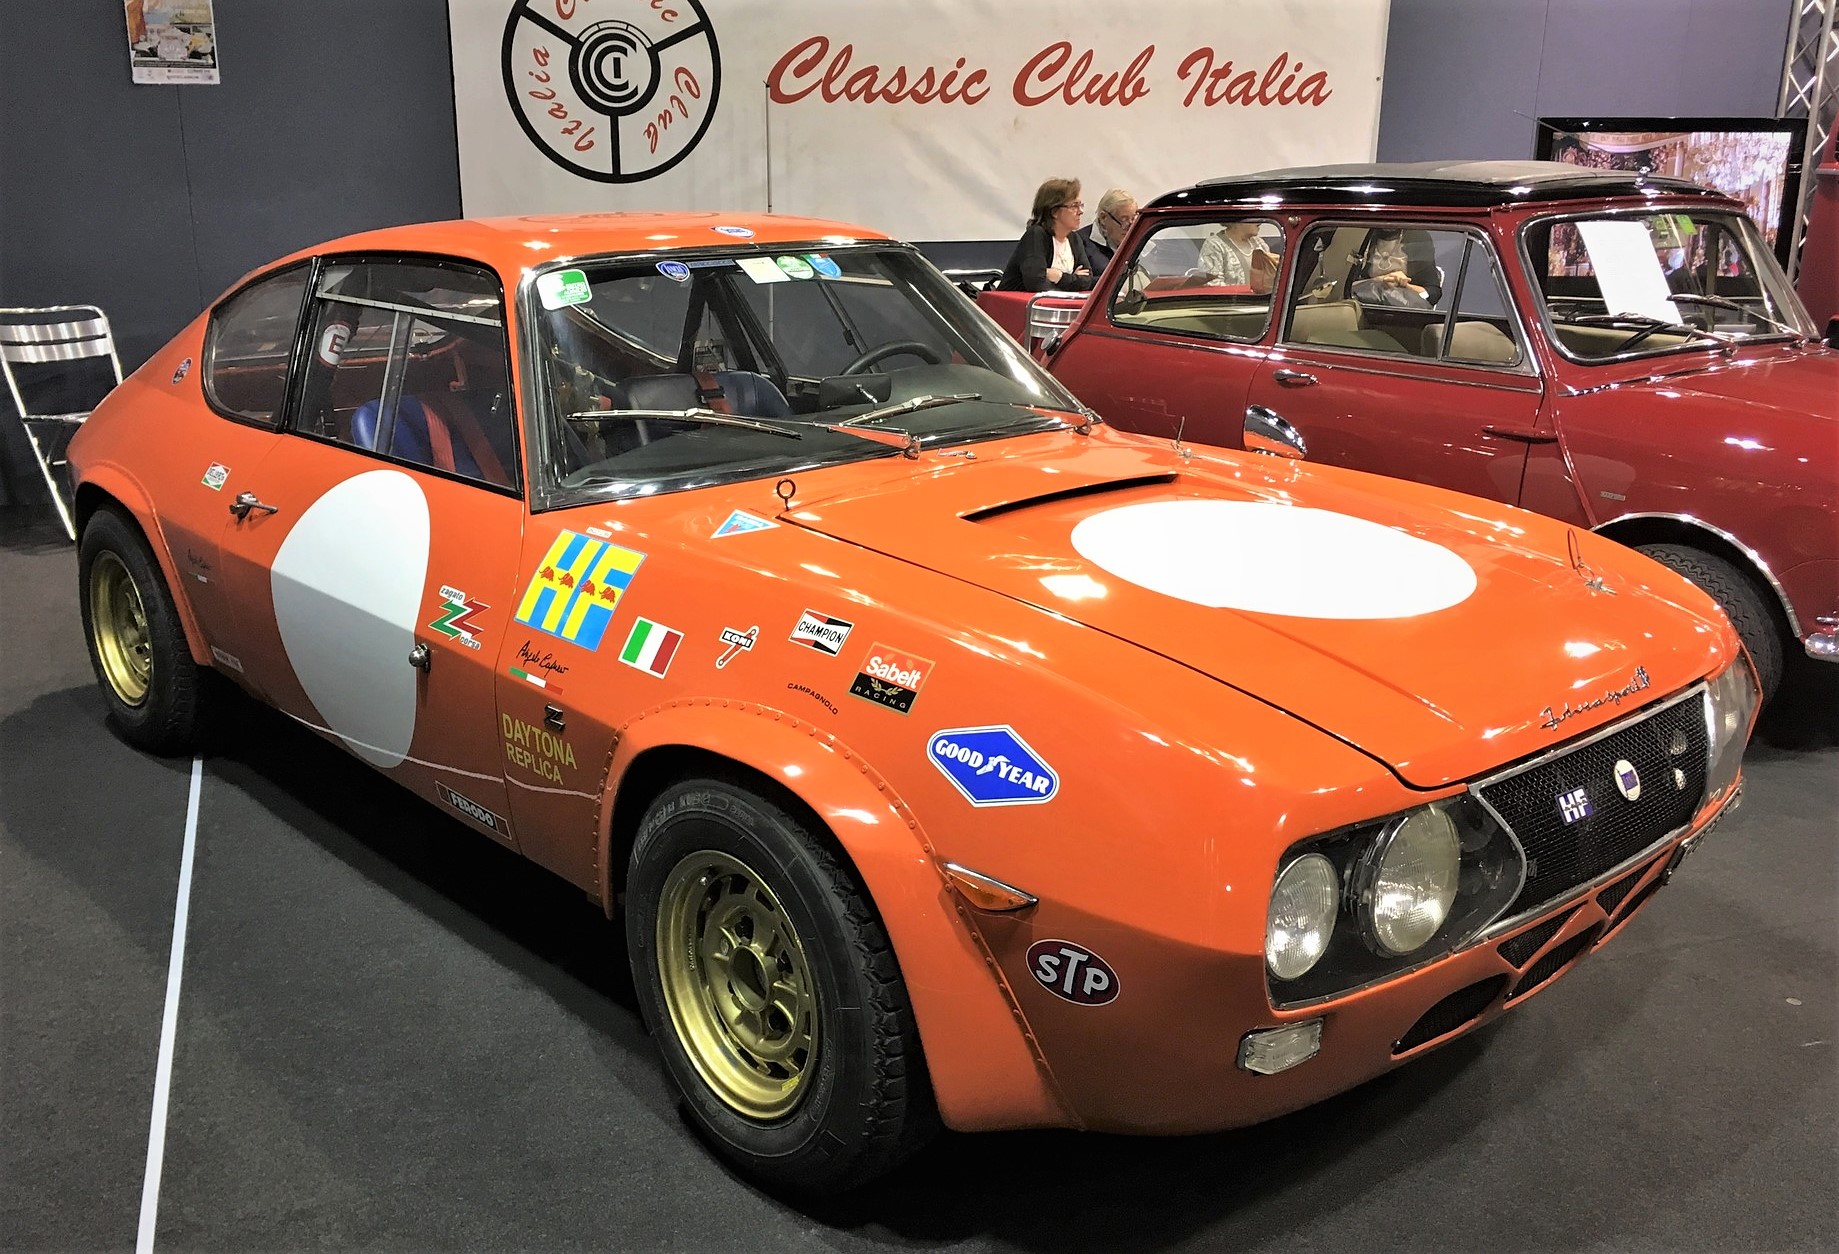 , Fairest of the Fiera: The best of Padova, ClassicCars.com Journal